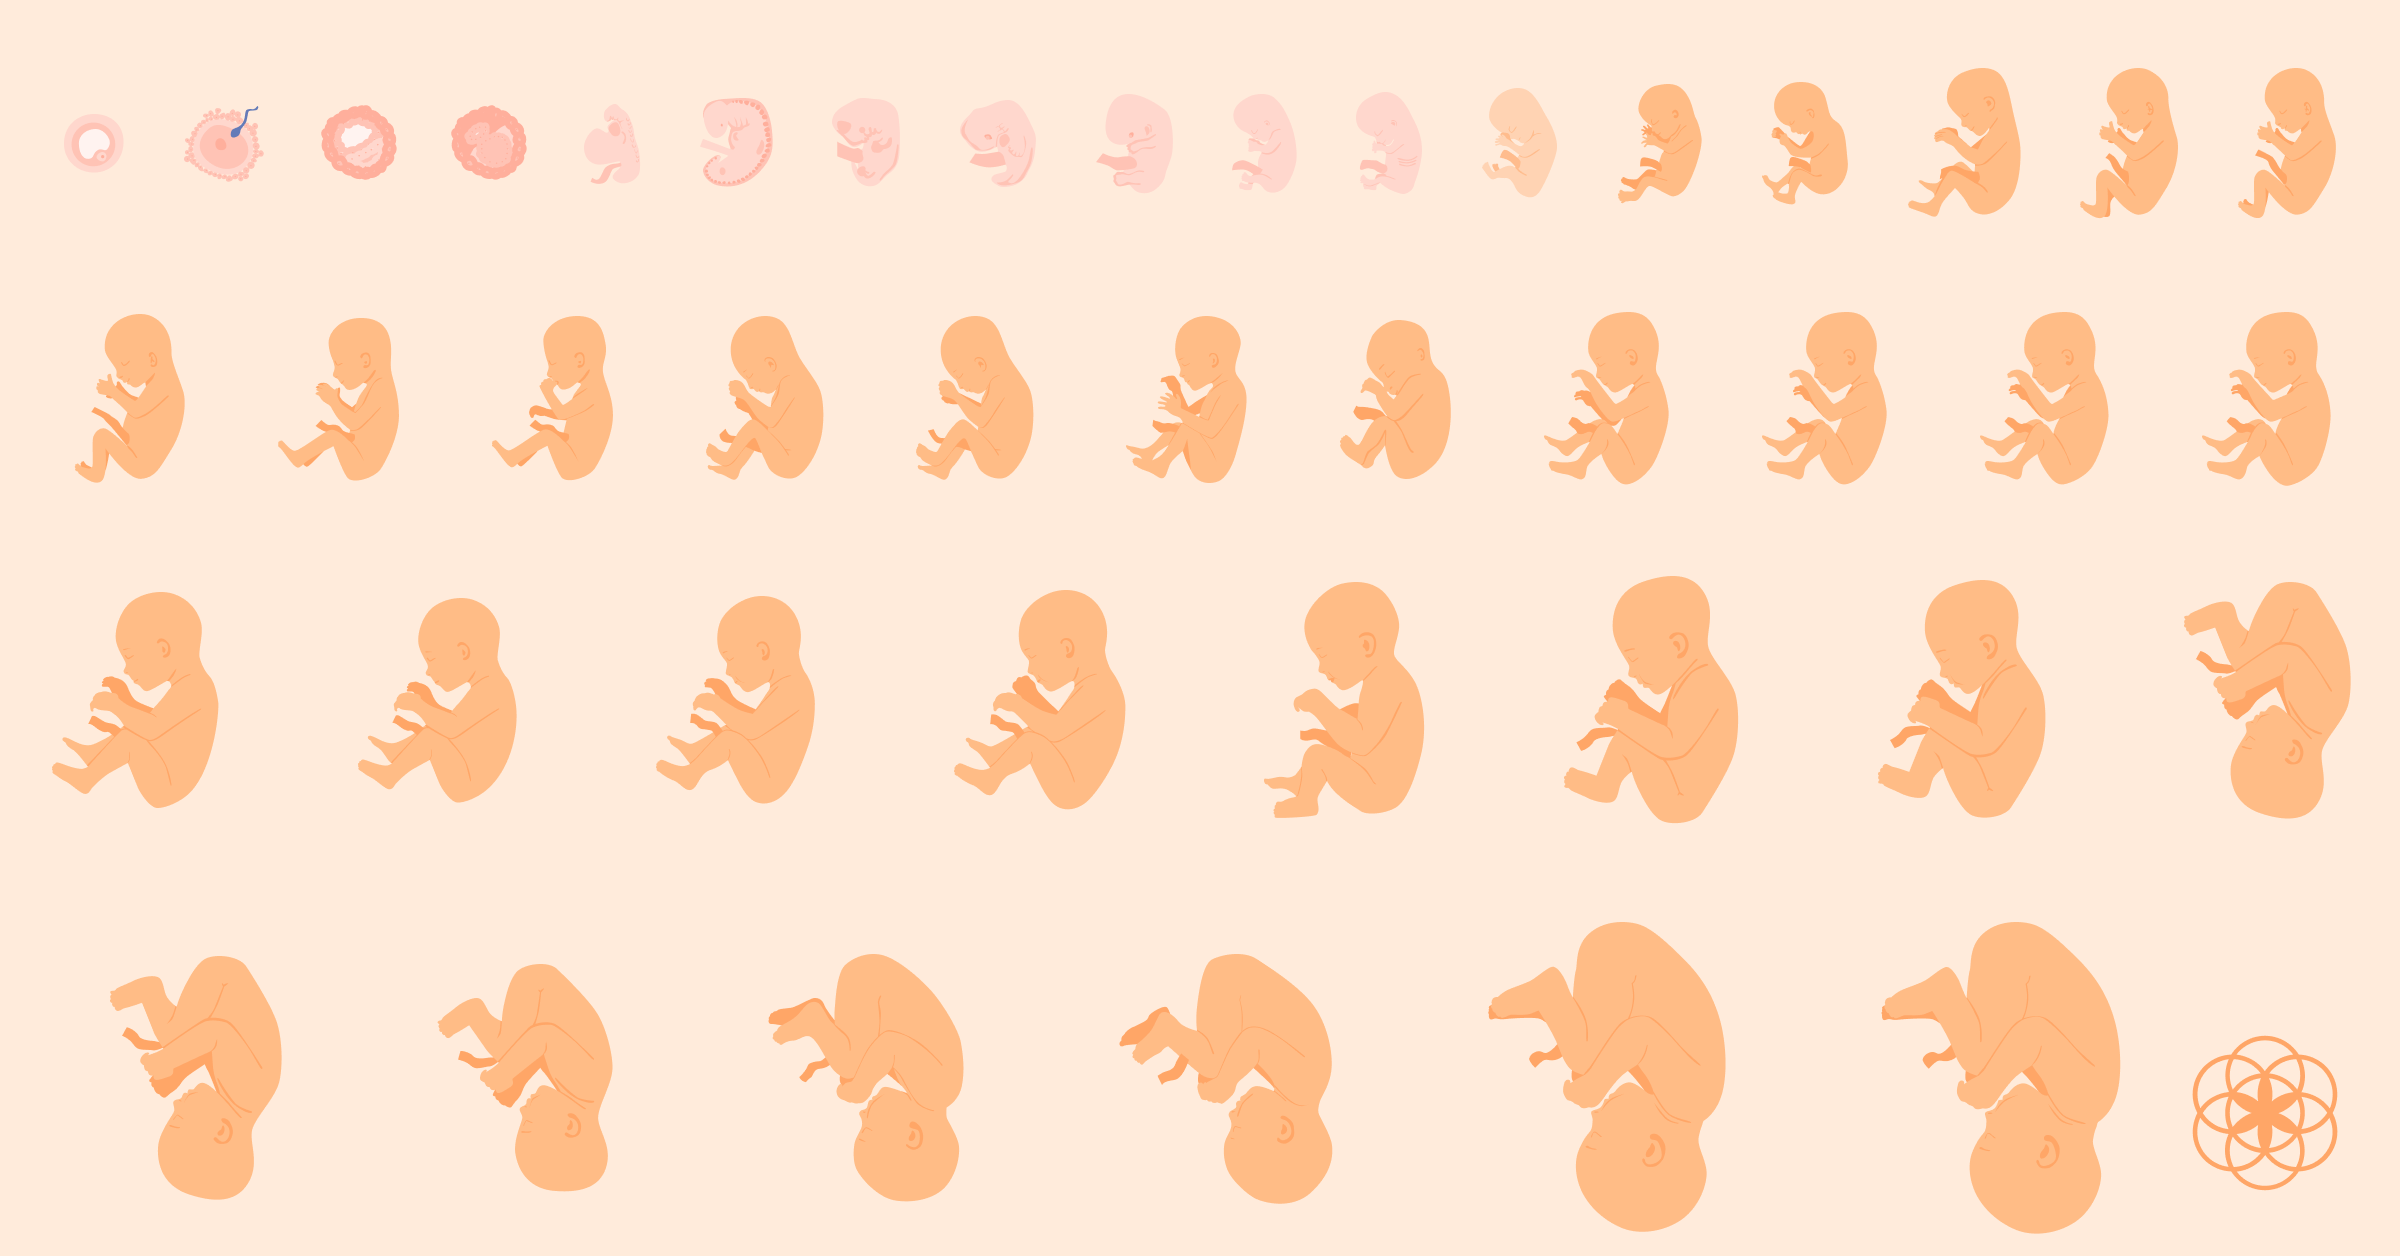 the growth cycle of a fetus